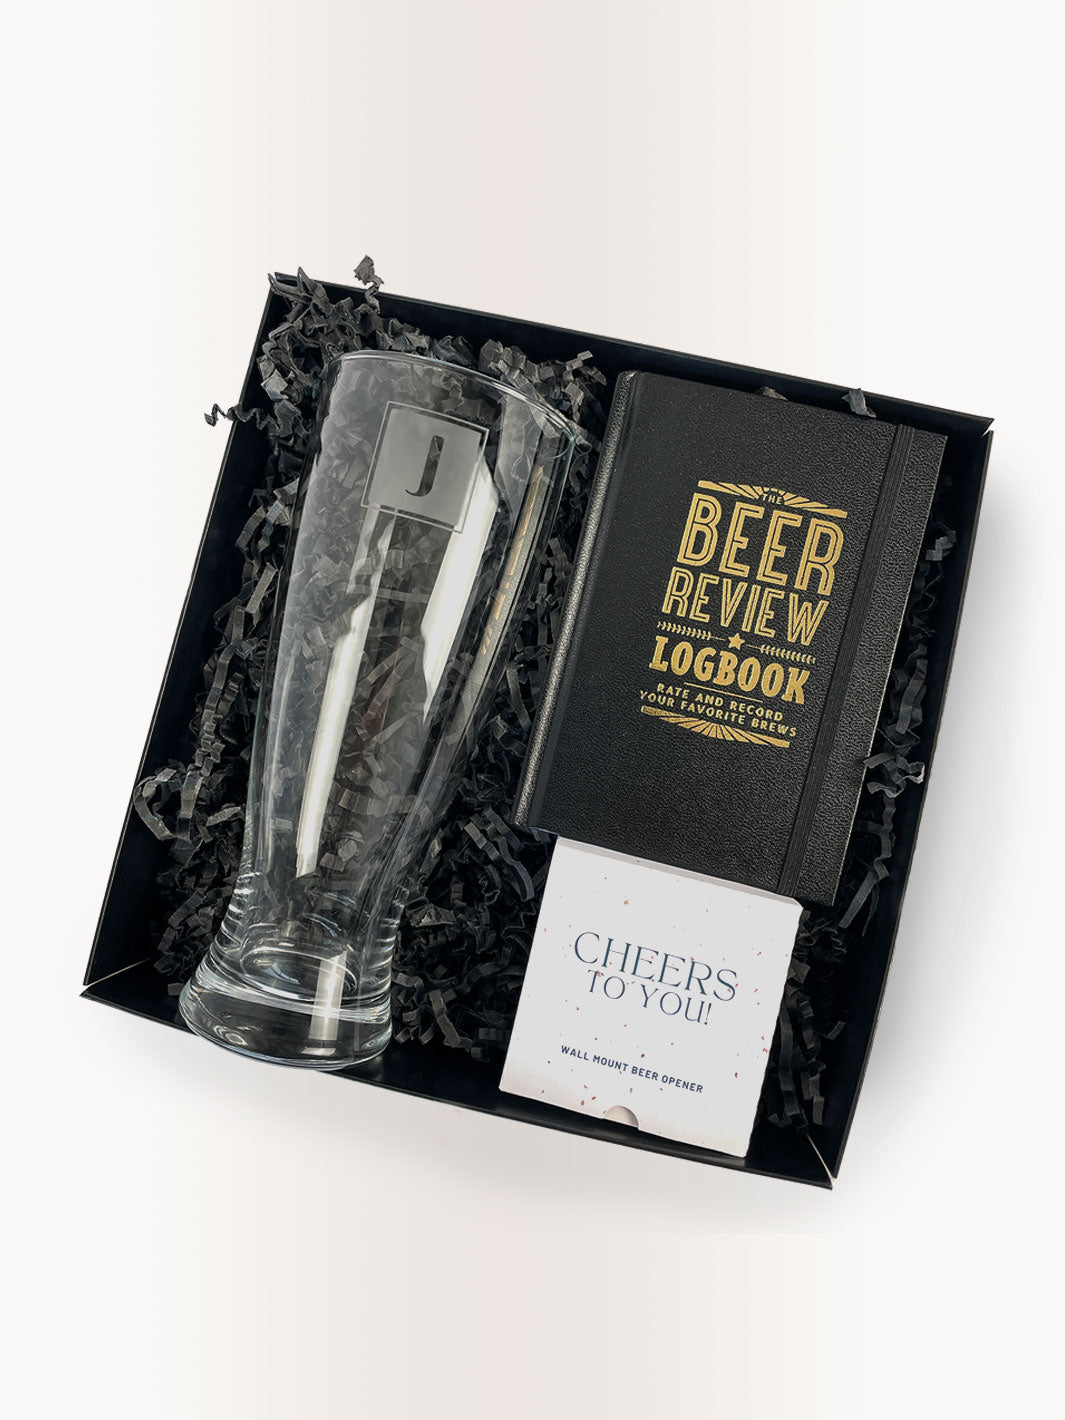 The Professional Beer Taster Gift Box - Personalize it!